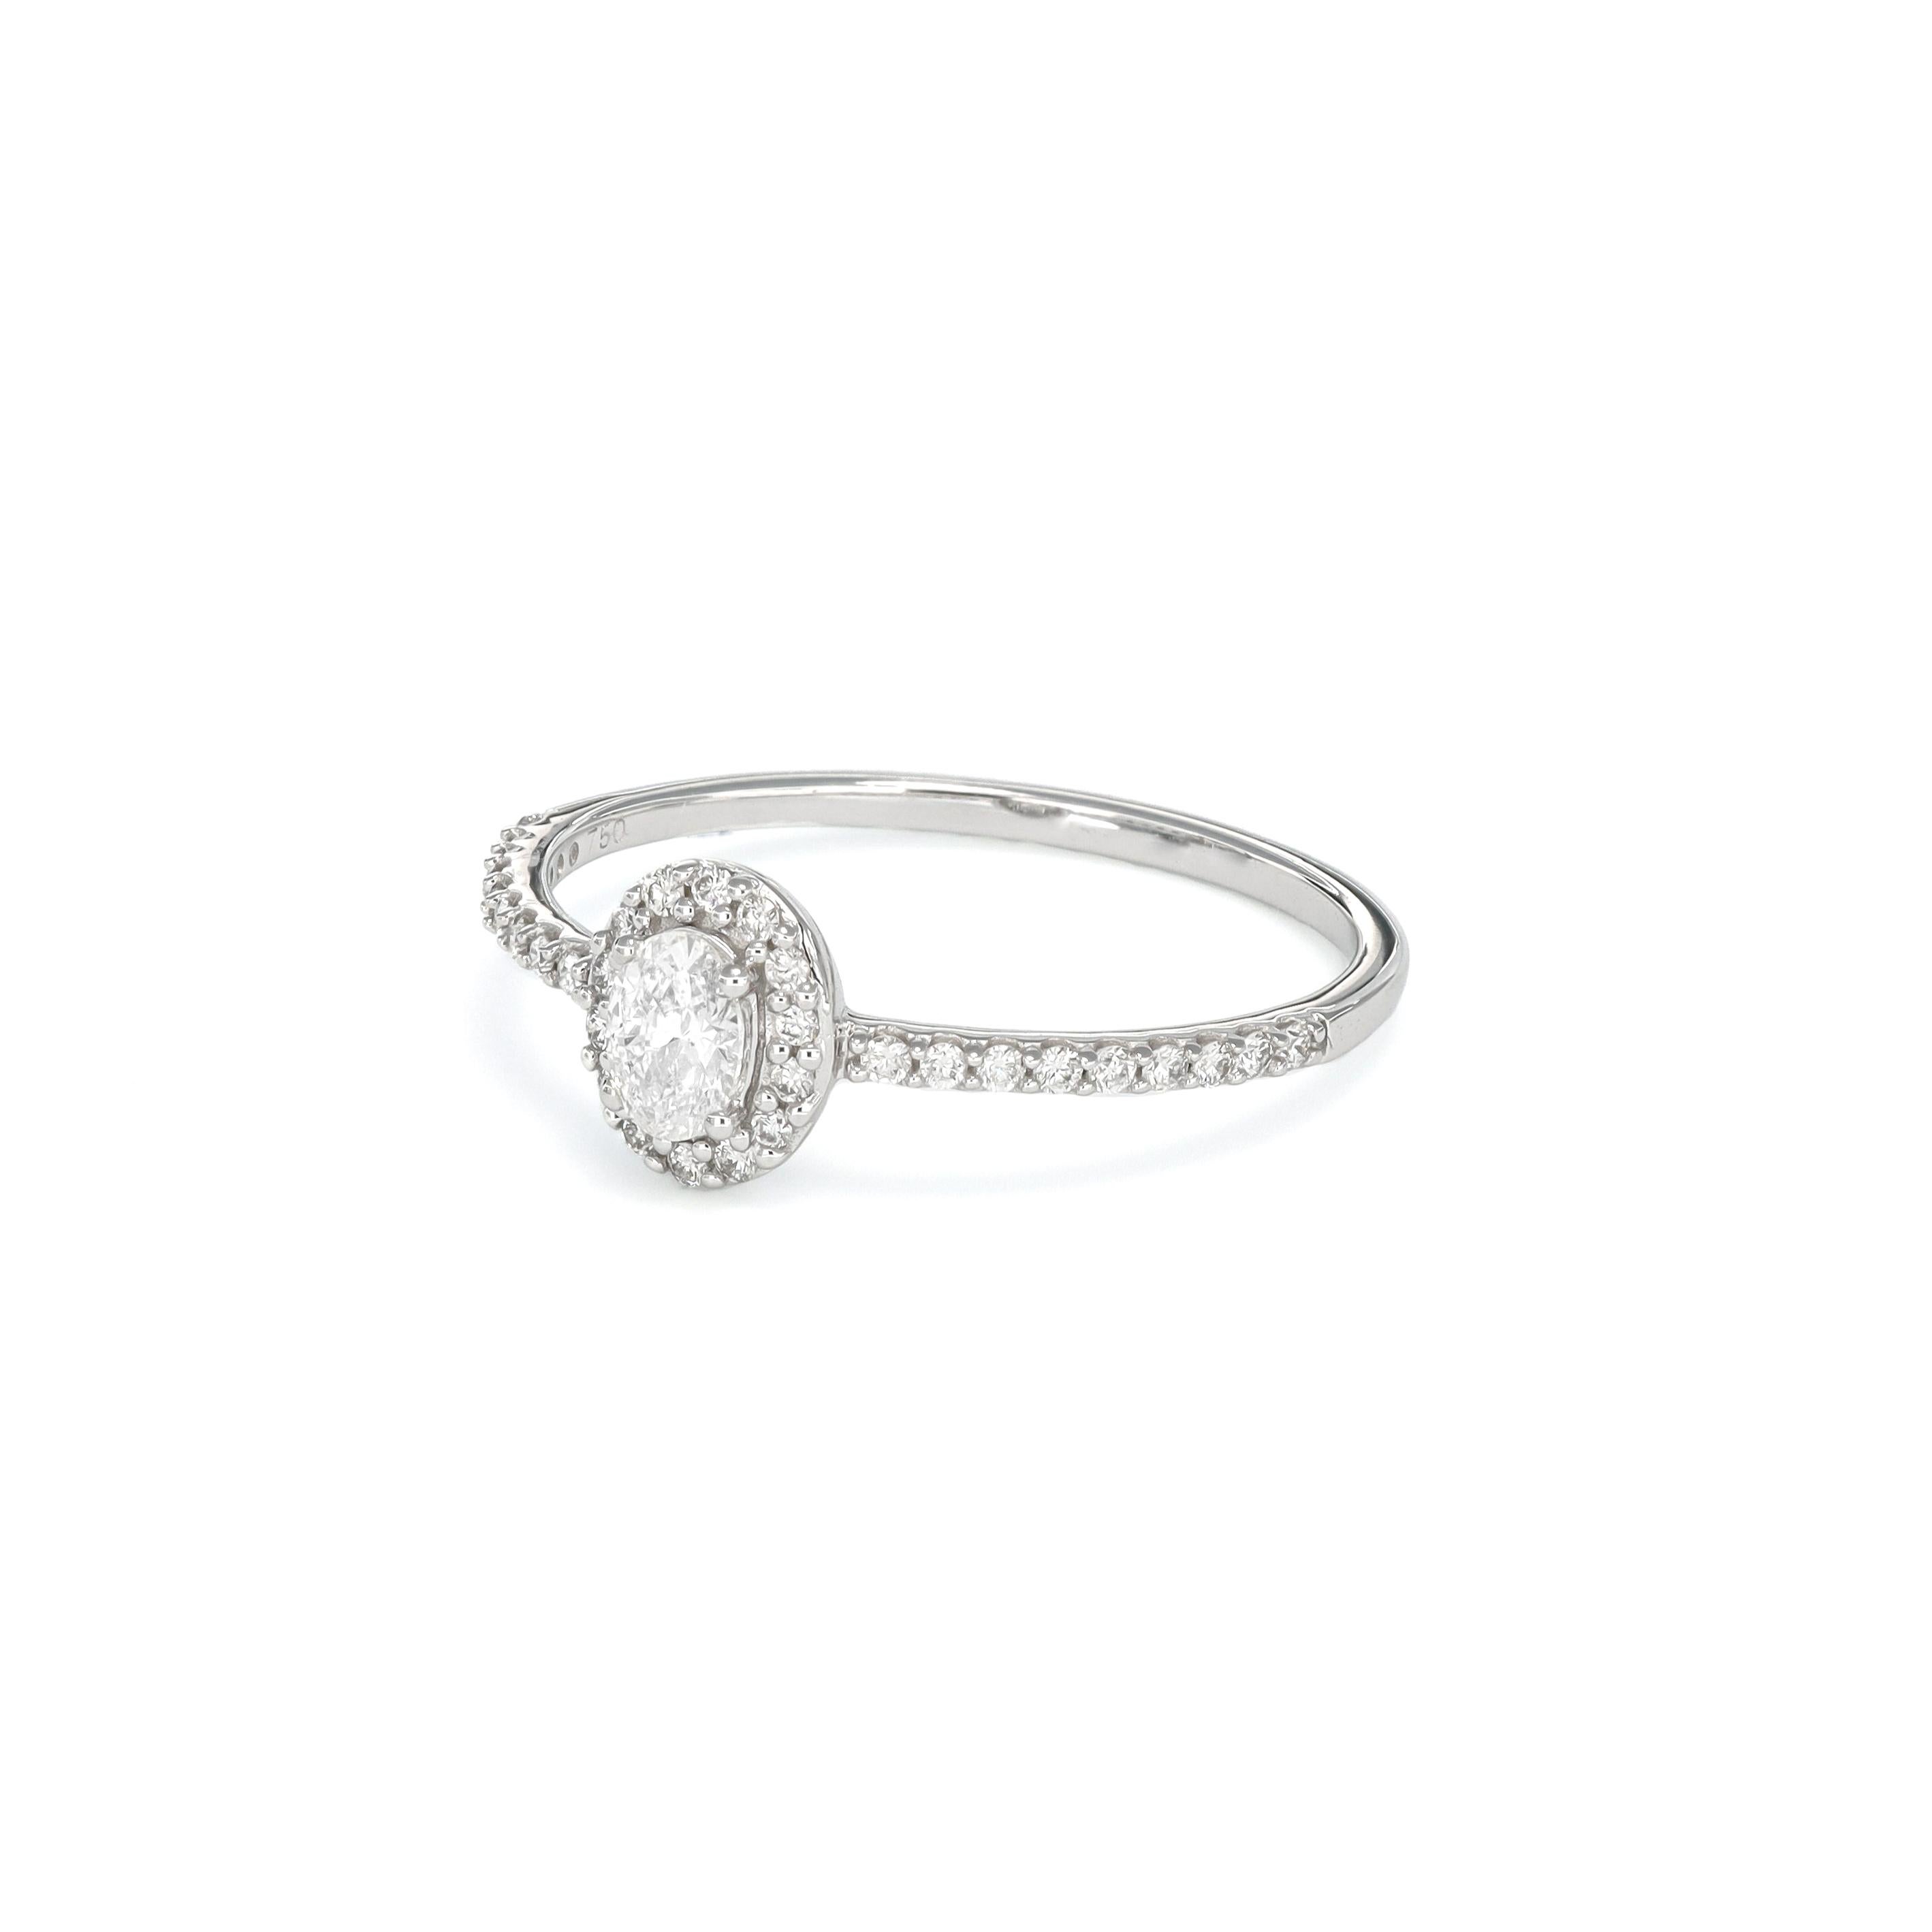 Introducing the epitome of timeless sophistication, behold the exquisite solitaire engagement ring featuring a mesmerizing middle oval-shaped diamond with a halo, elegantly accented by 0.35 carats of diamonds gracefully adorning the shanks. This